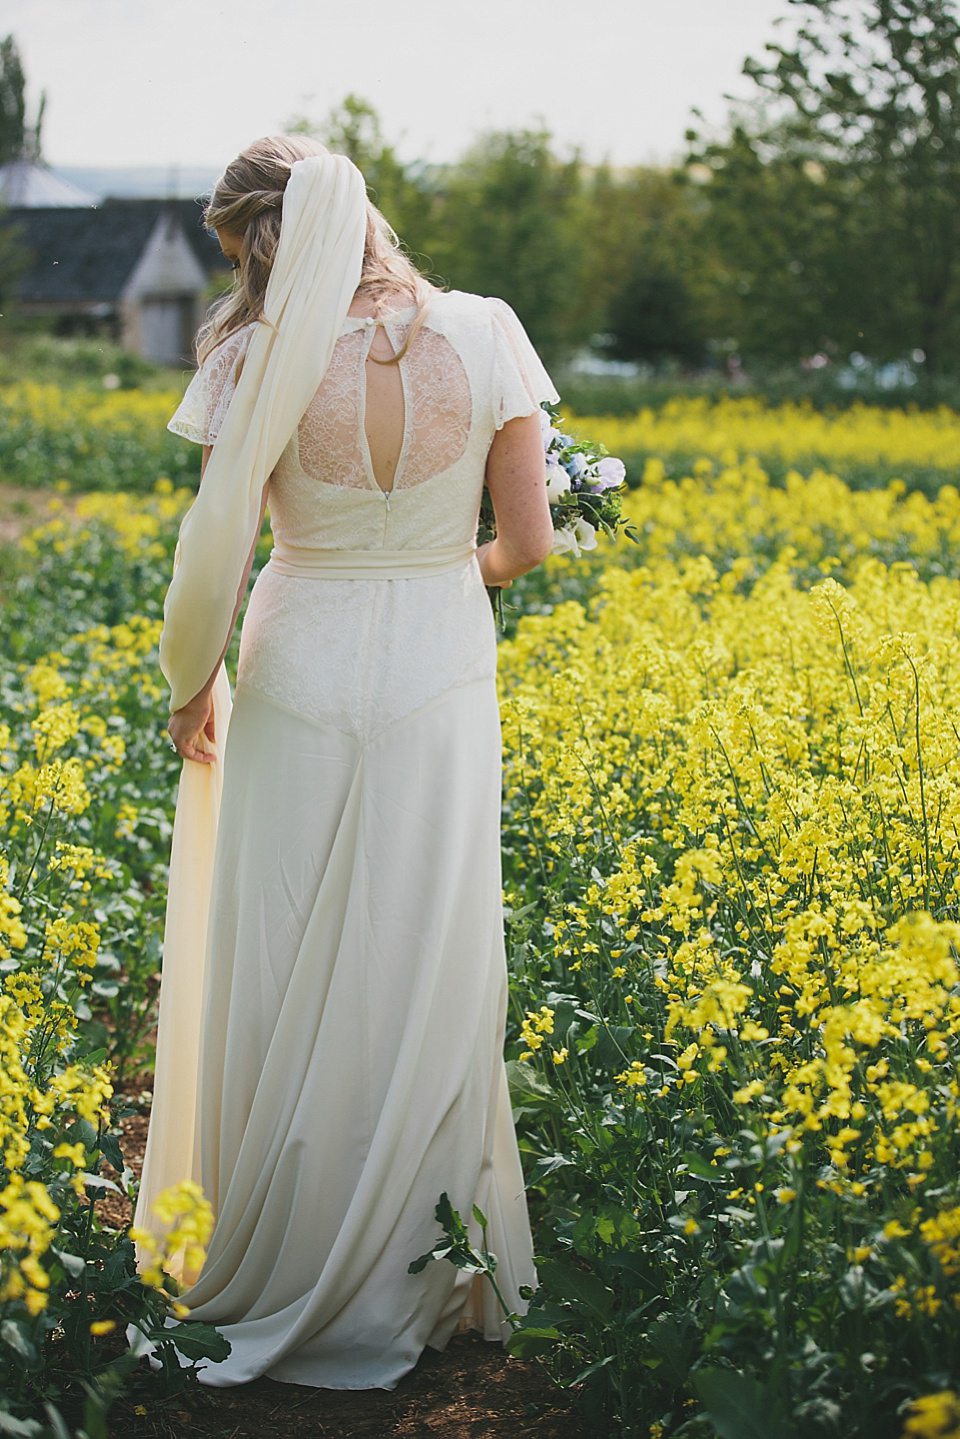 Belle & Bunty wedding dress // English country fete style wedding // McKinley Rodgers Photography